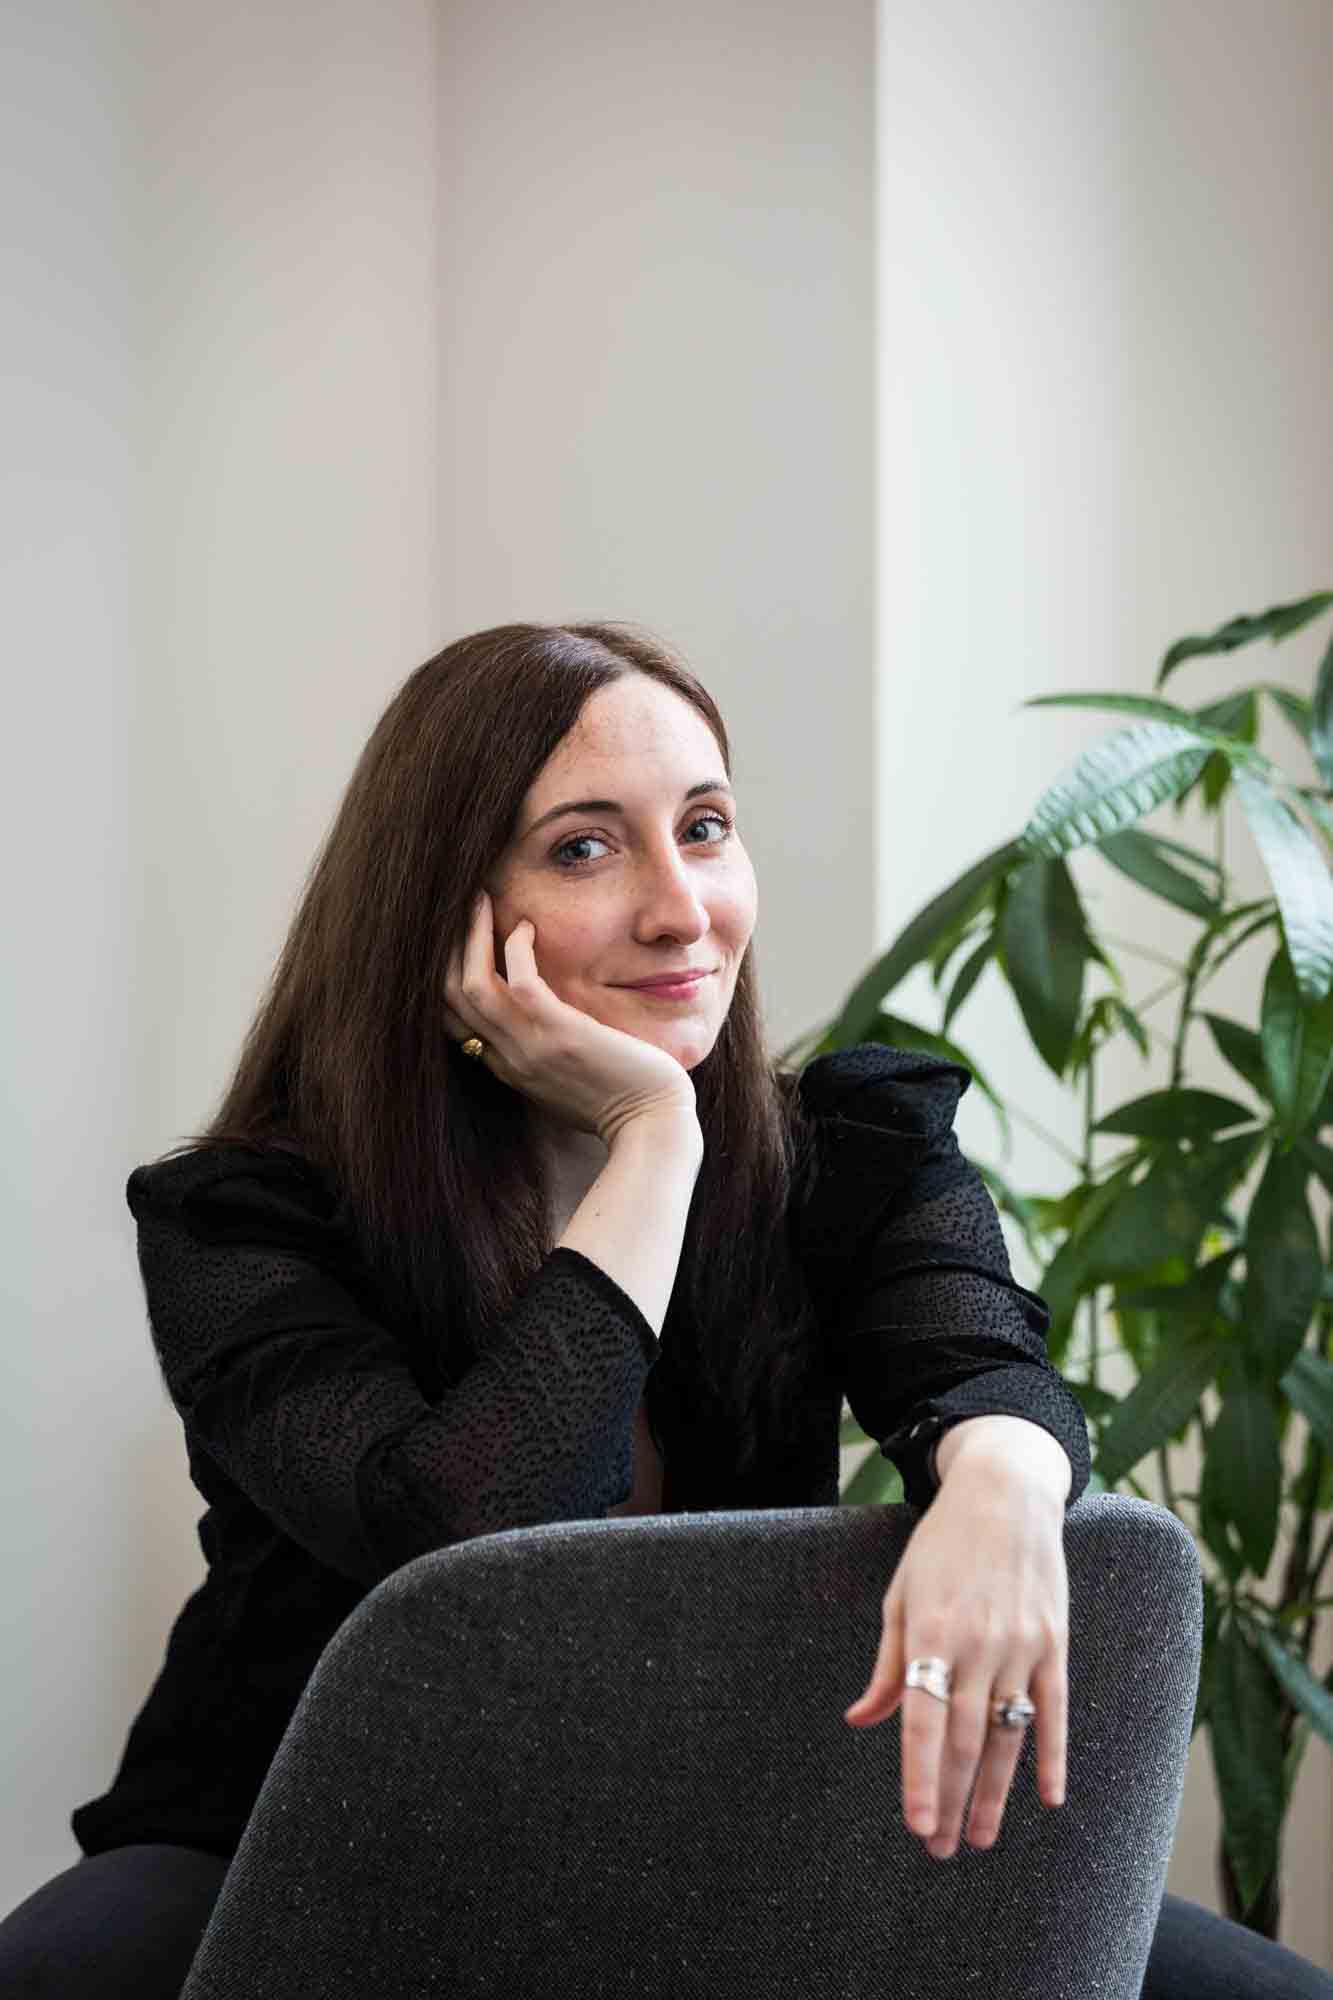 Female author wearing black blouse sitting in chair with plant for an article on professional headshot tips